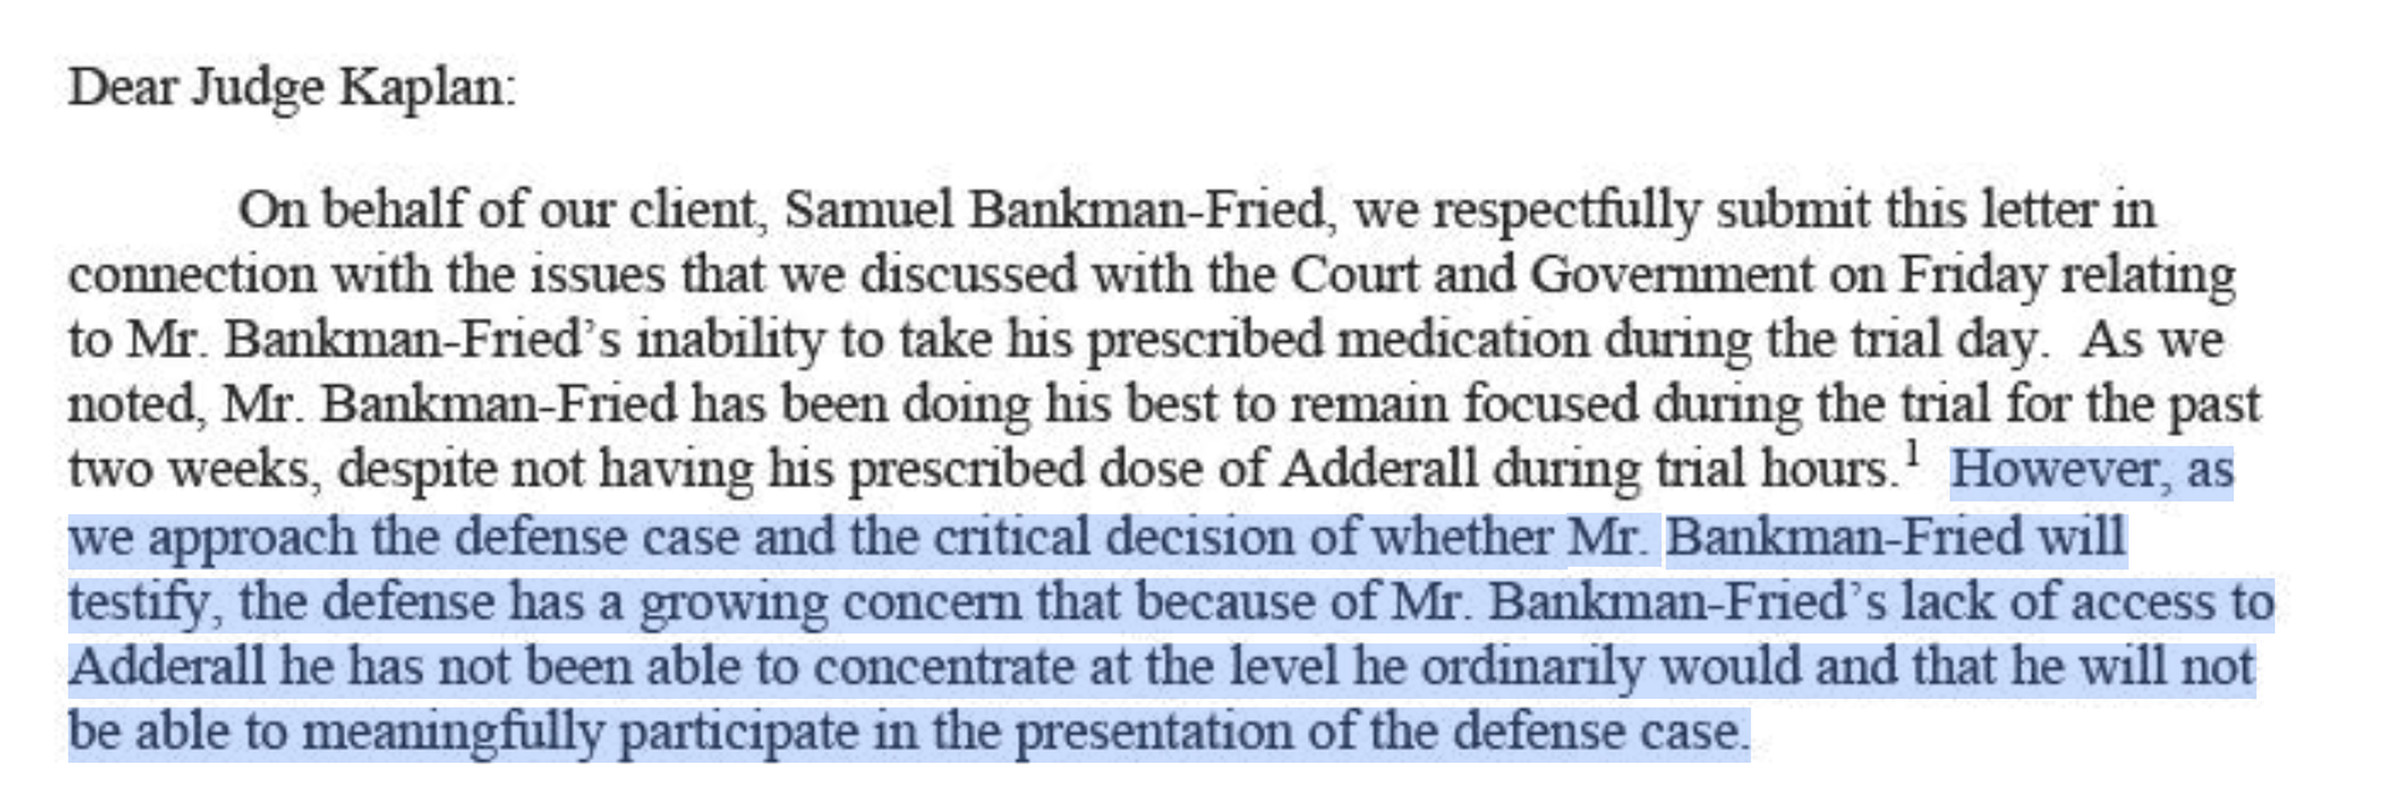 However, as we approach the defense case and the critical decision of whether Mr. Bankrnan-Fried will testify, the defense has a growing concem that because of Mr. Bankman-Fried’s lack of access to Adderall he has not been able to concentrate at the level he ordinarily would and that he will not be able to meaningfully participate in the presentation of the defense case.